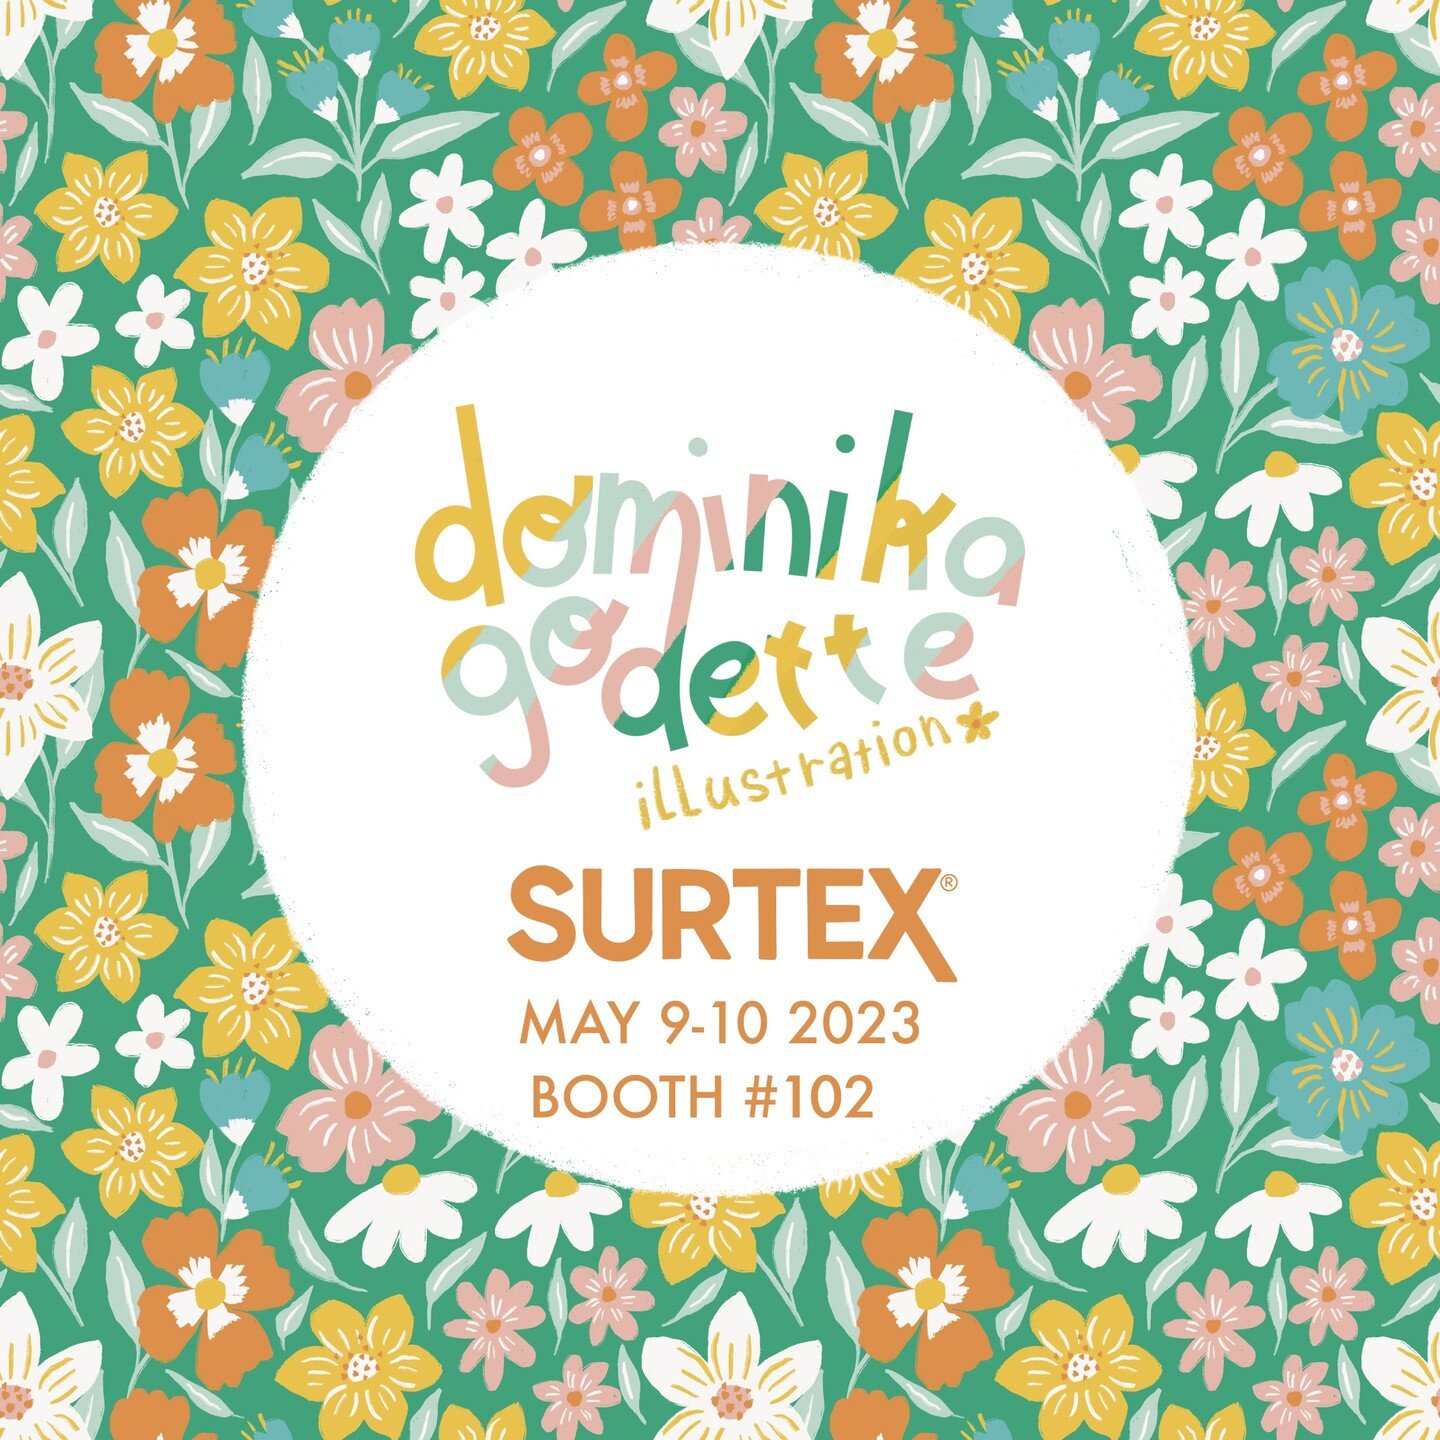 Happy Friday everyone and a last minute invite for @surtexshow come see me on Tuesday and Wednesday in NYC!
Can't wait!
.
.
.
#tradeshow #surtexshow2023 #surtex #patternillustration #artlicensing #patterndesign #surfacepatterndesign #fabricdesign #te